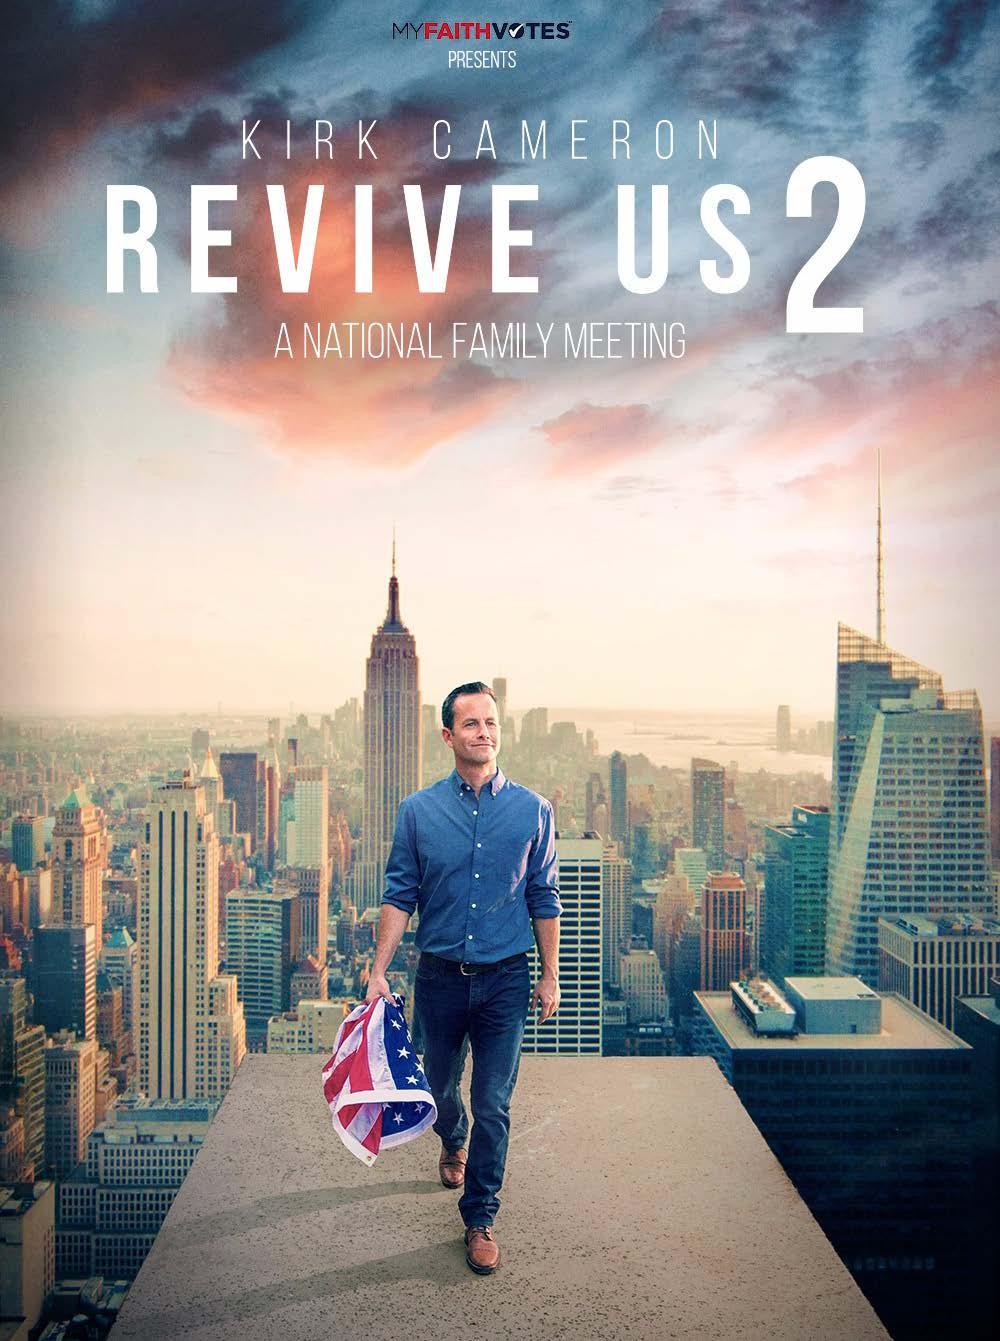 IN THEATERS OCT 24, NOV 1 REVIVE US 2 - A National Family Meeting Following the remarkable success of last year s REVIVE US, Kirk Cameron returns to the big screen with REVIVE US 2 - A National